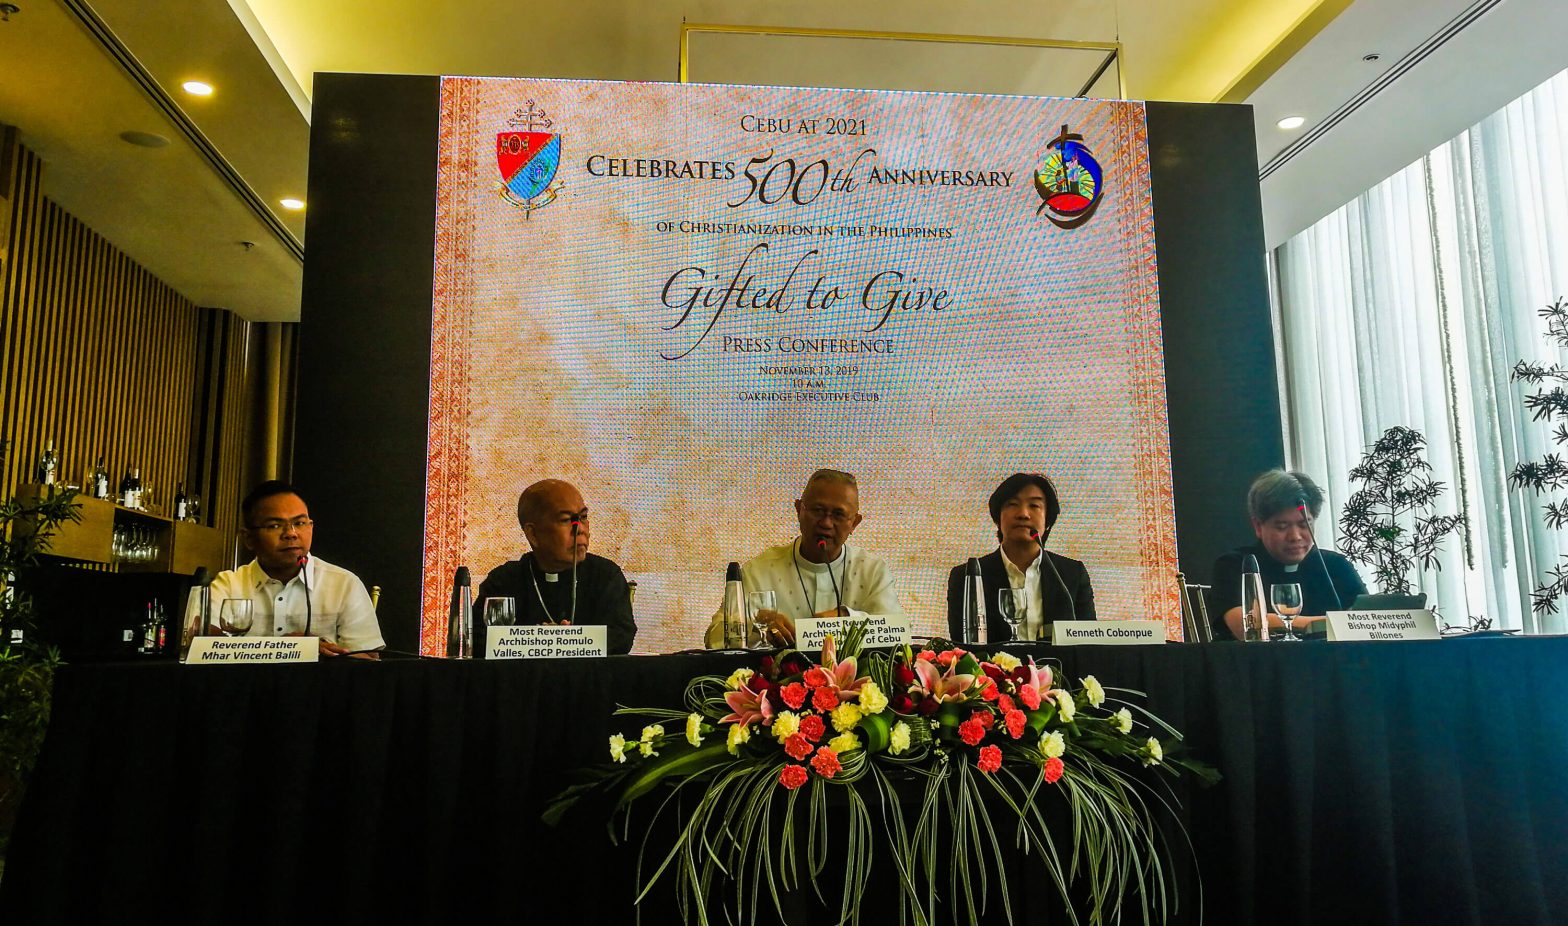 Cebu Archdiocese, CBCP to focus on first baptism, spread of faith in 2021 celebration